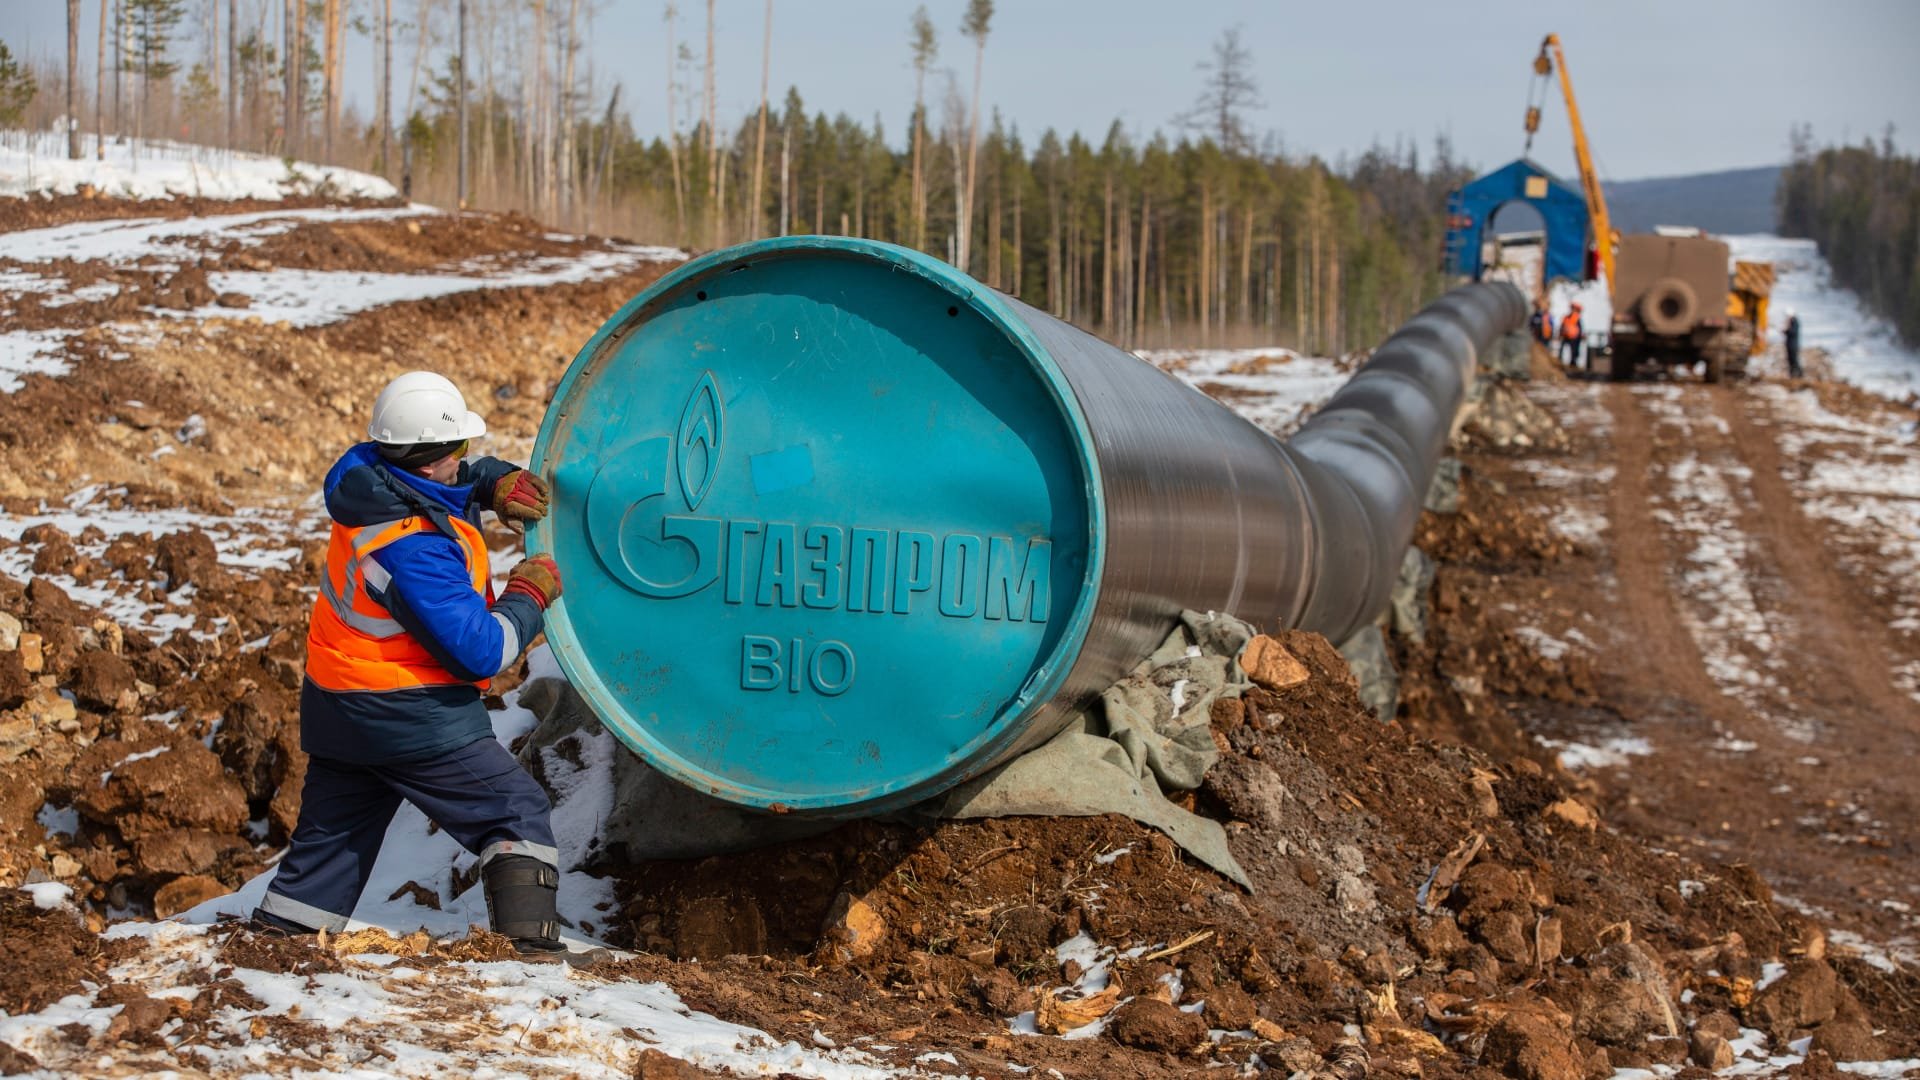 Gas is key in the Russia-Ukraine conflict — and supply could be disrupted around the world